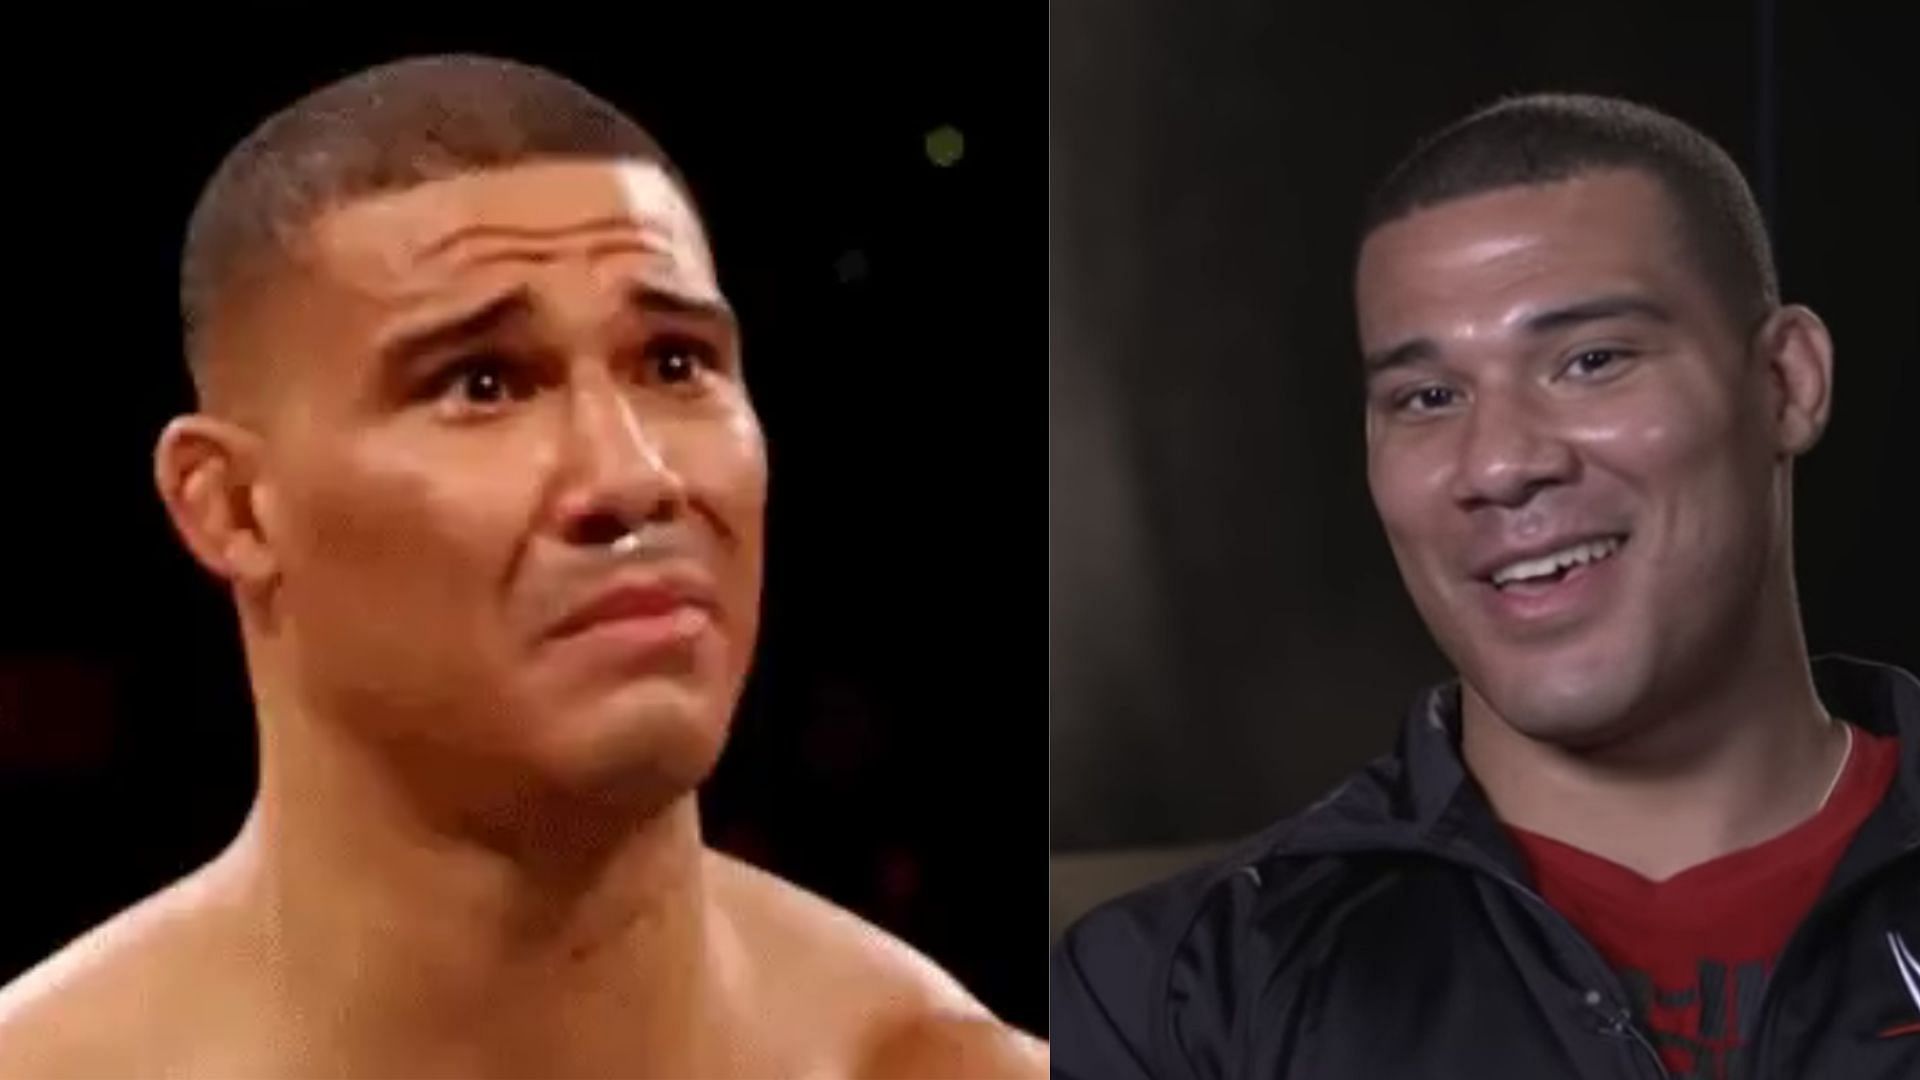 Jason Jordan has been an important presence backstage during WWE shows